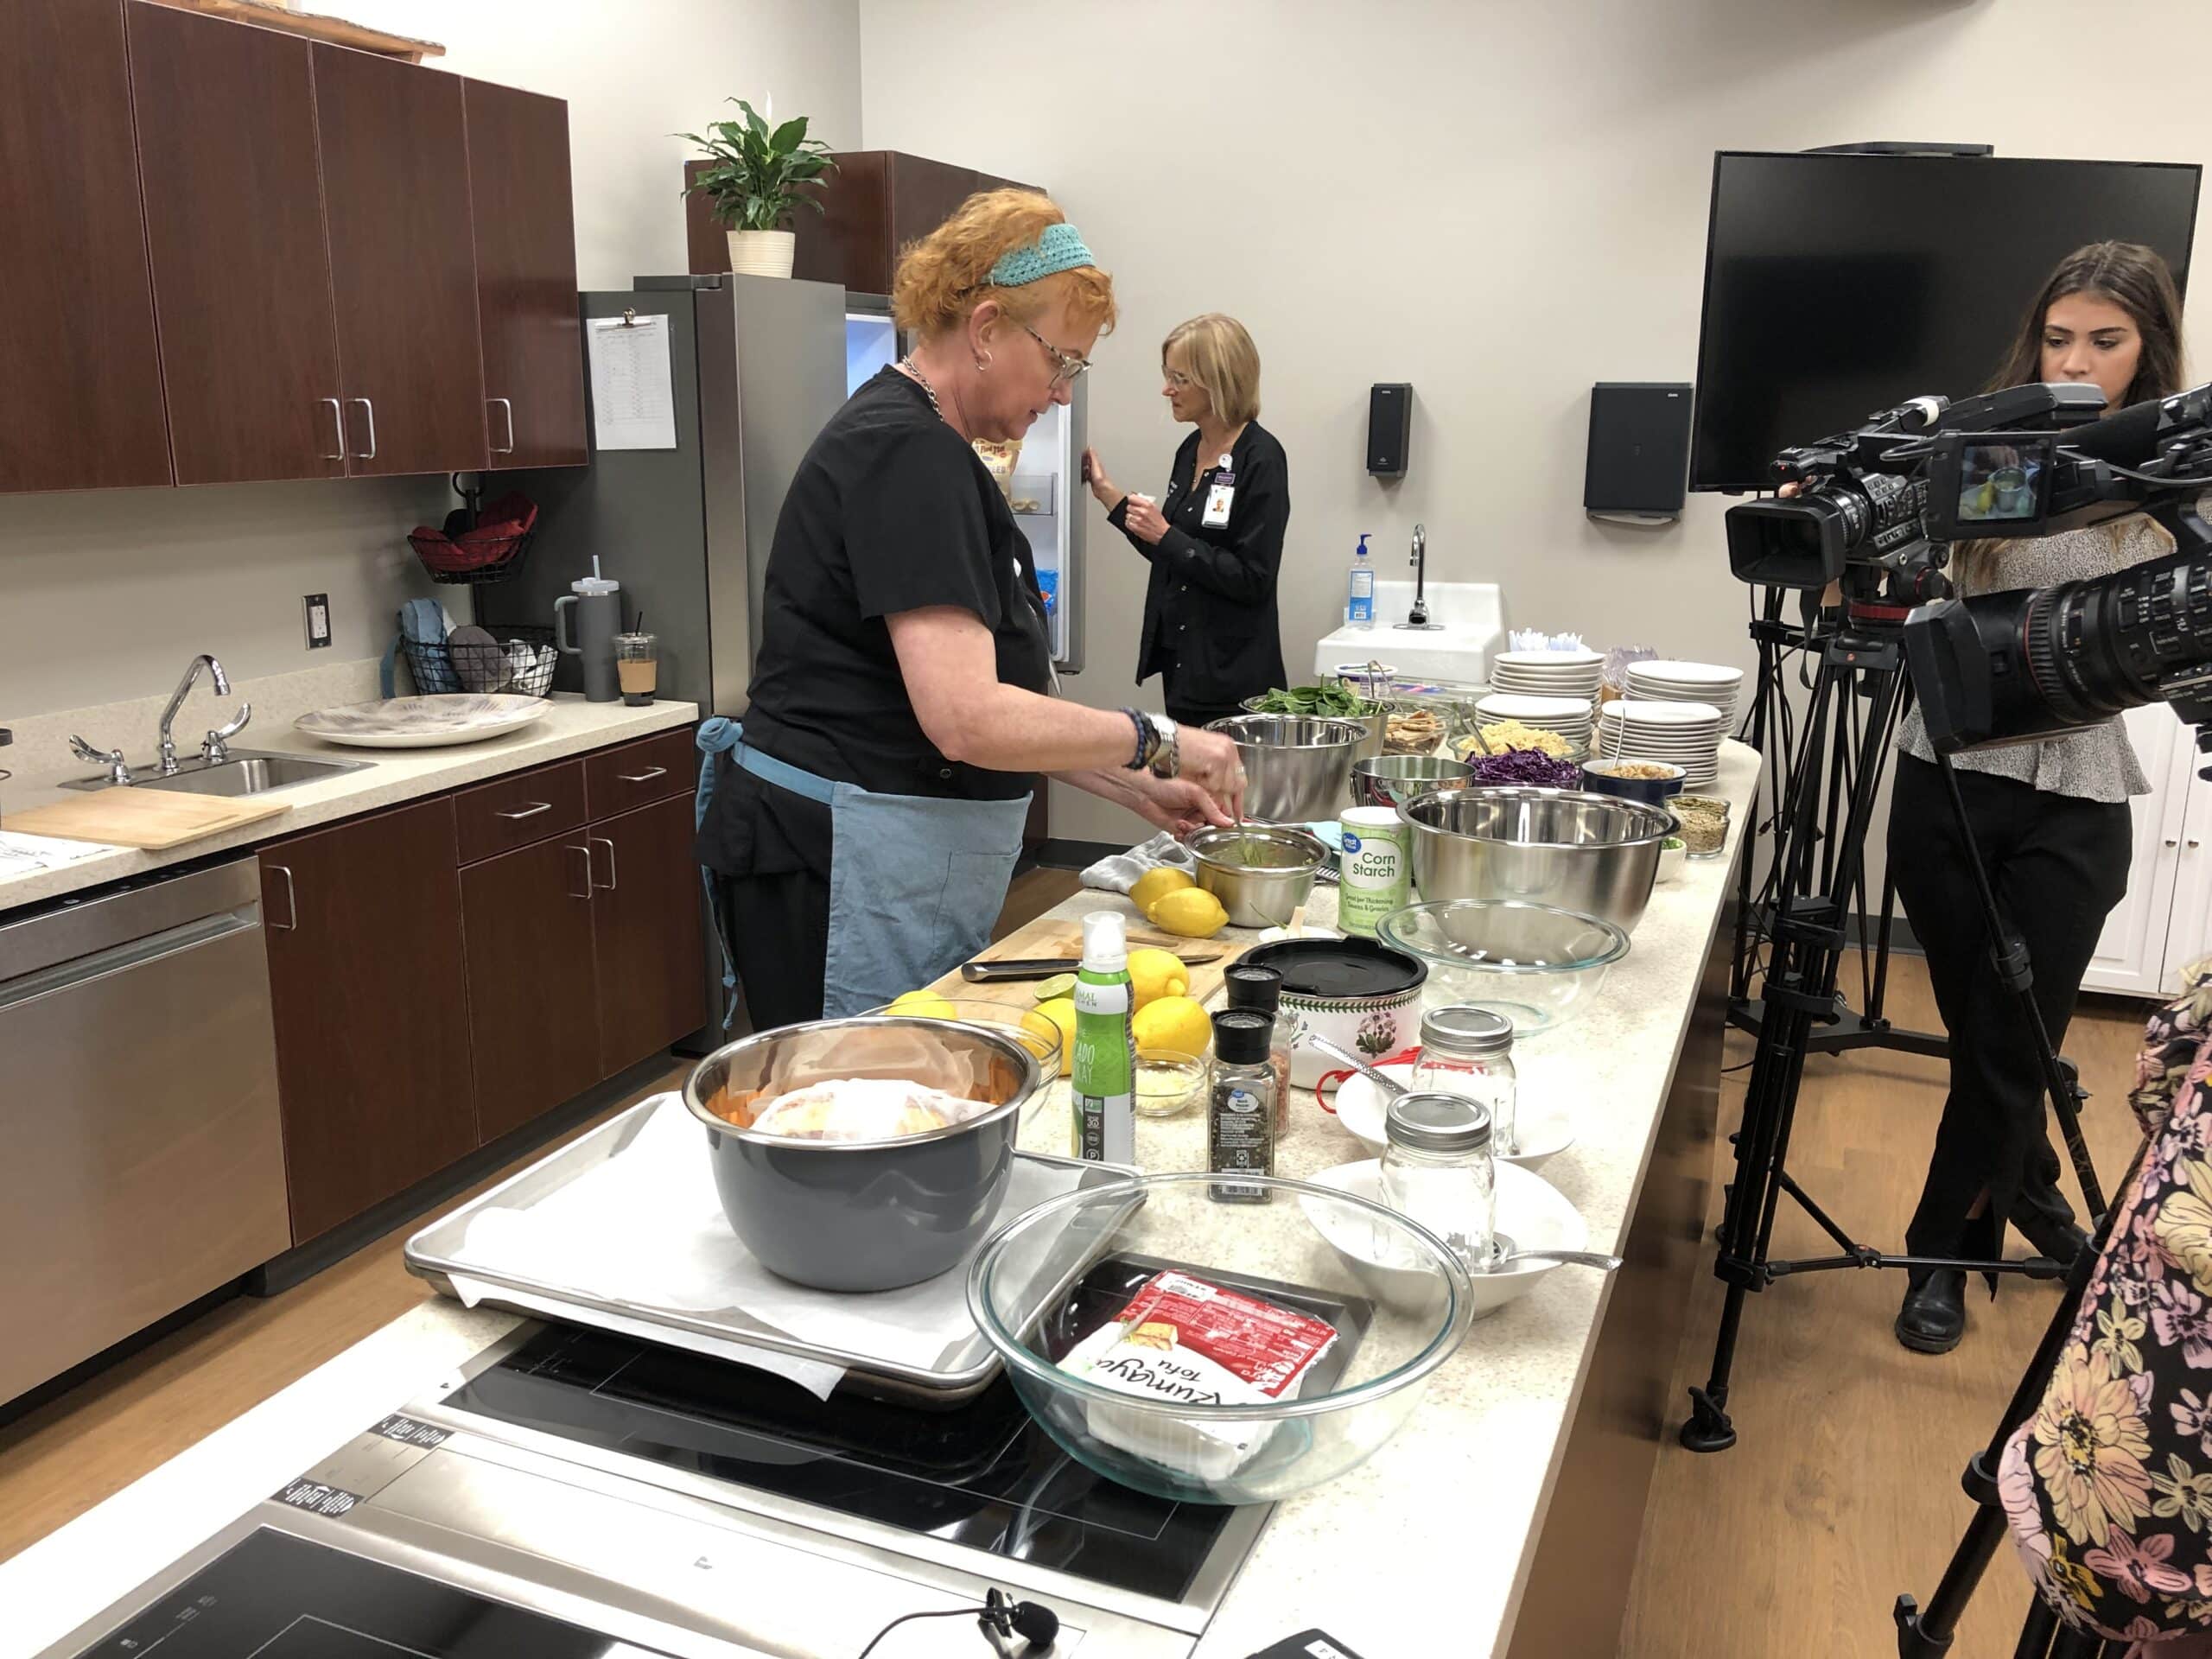 Susie Houston prepares a meal during a Lunch with a Doc event at ECU Health's Lifestyle Medicine Clinic in Greenville.